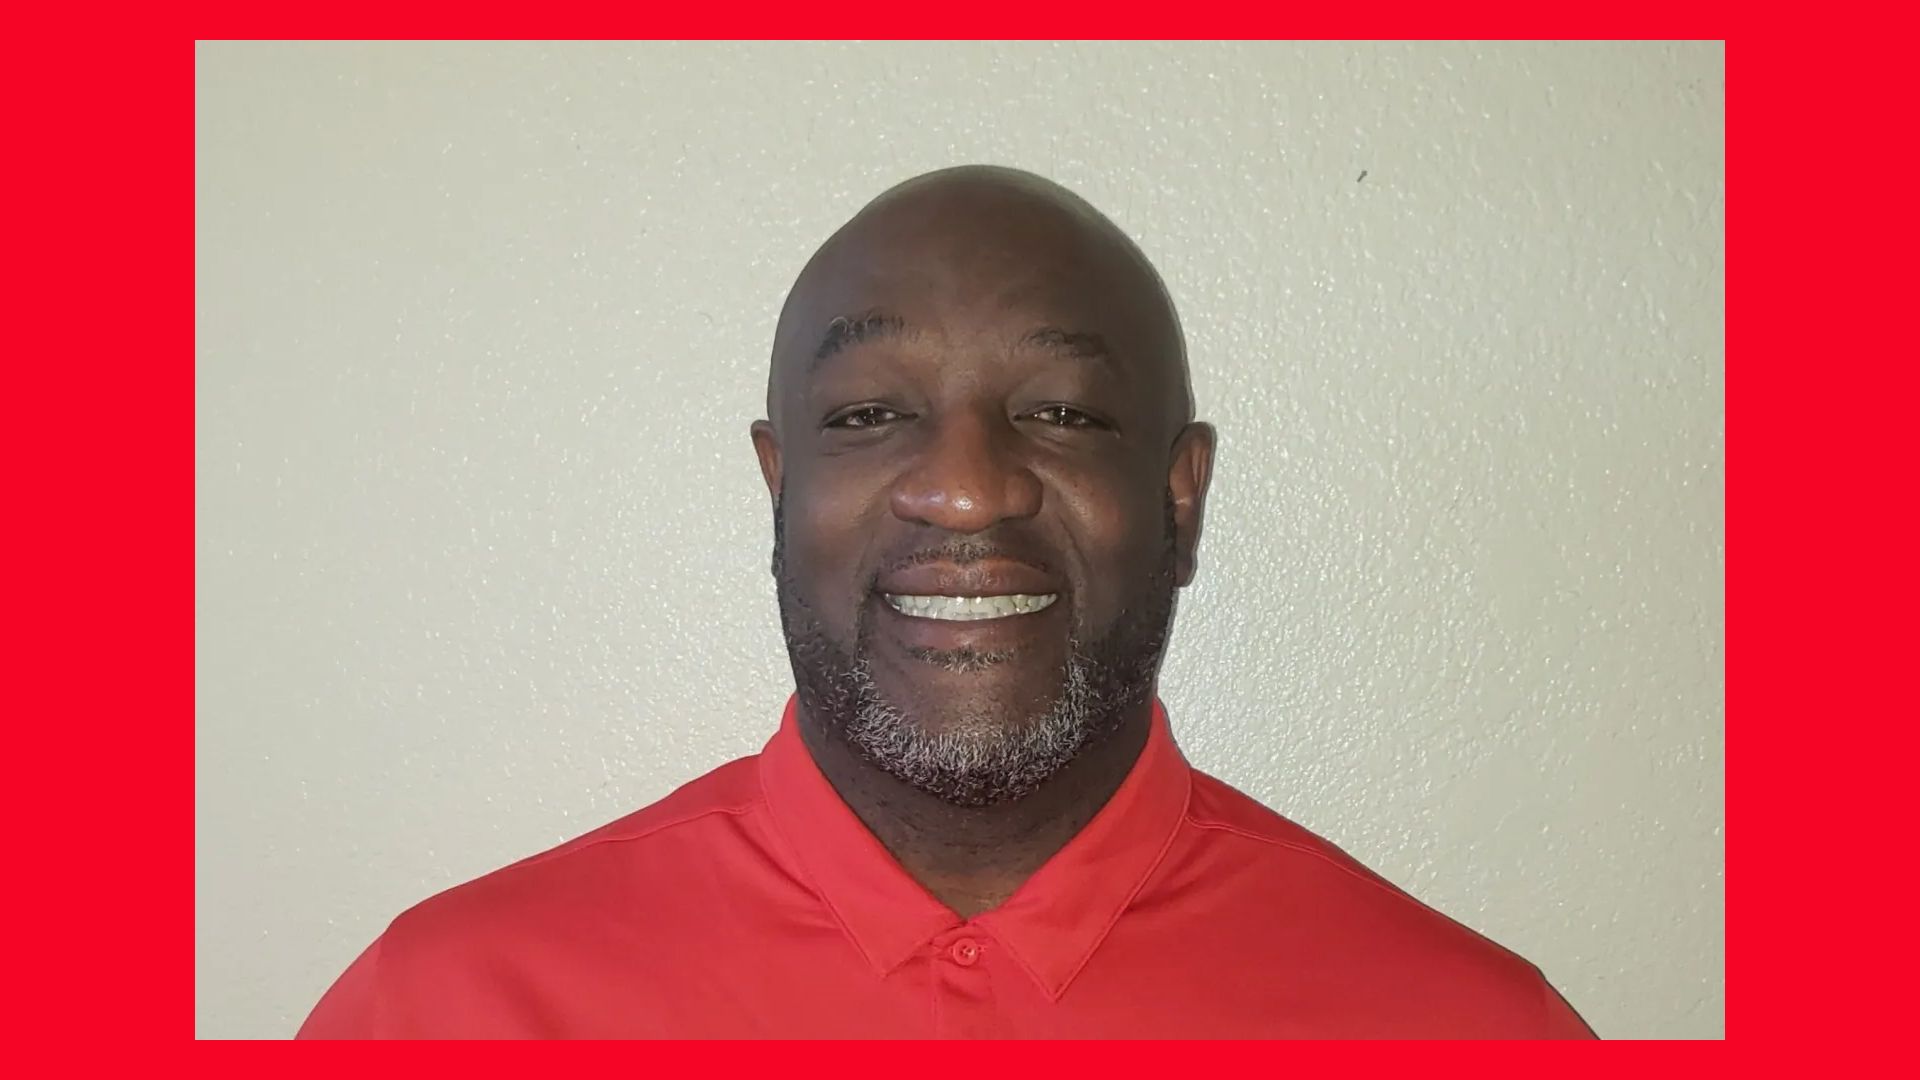 Profile of new men's basketball coach Lester Neal